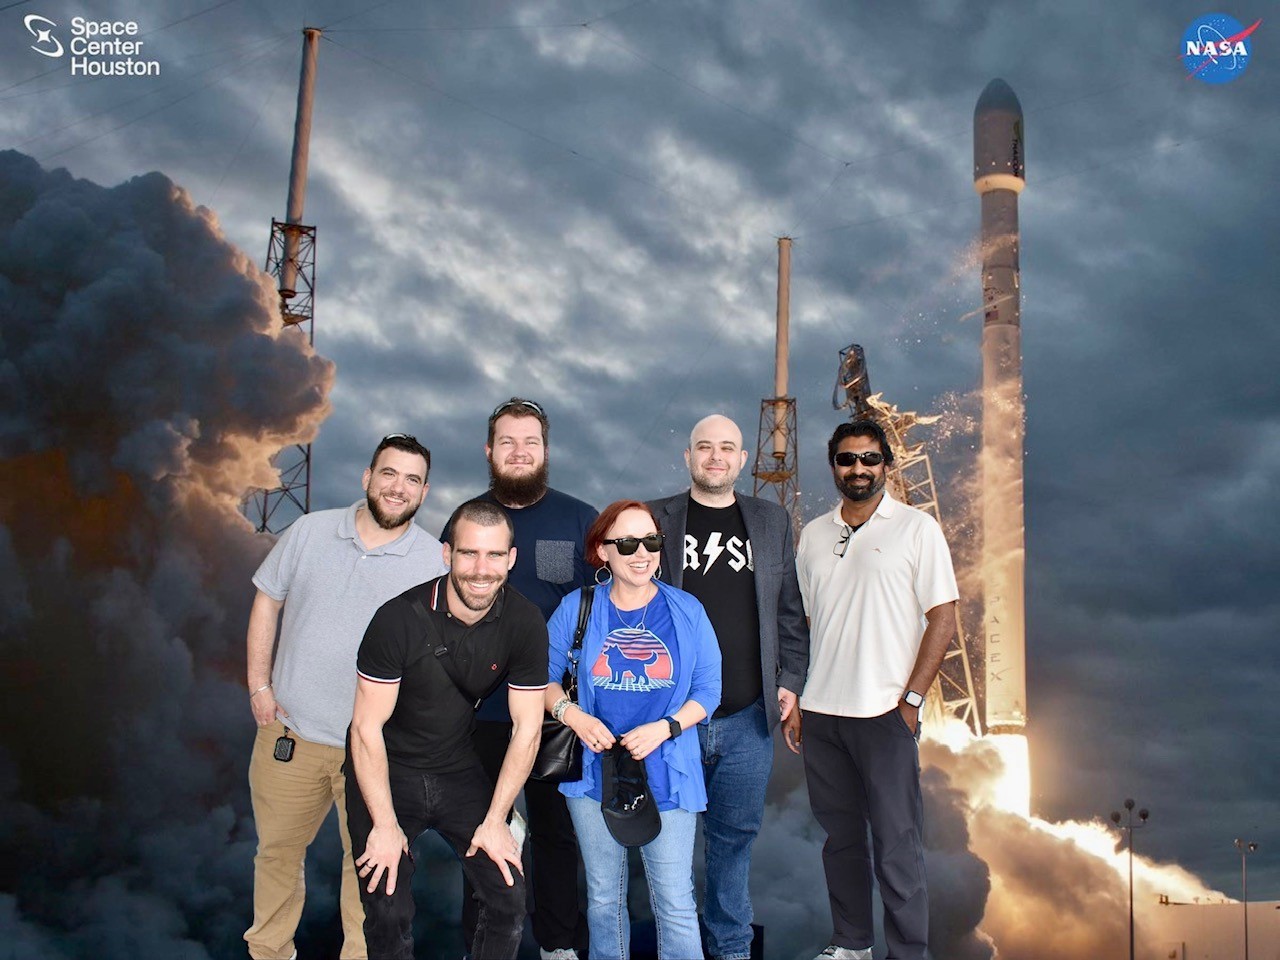 The crew came together for a team building trip to NASA.